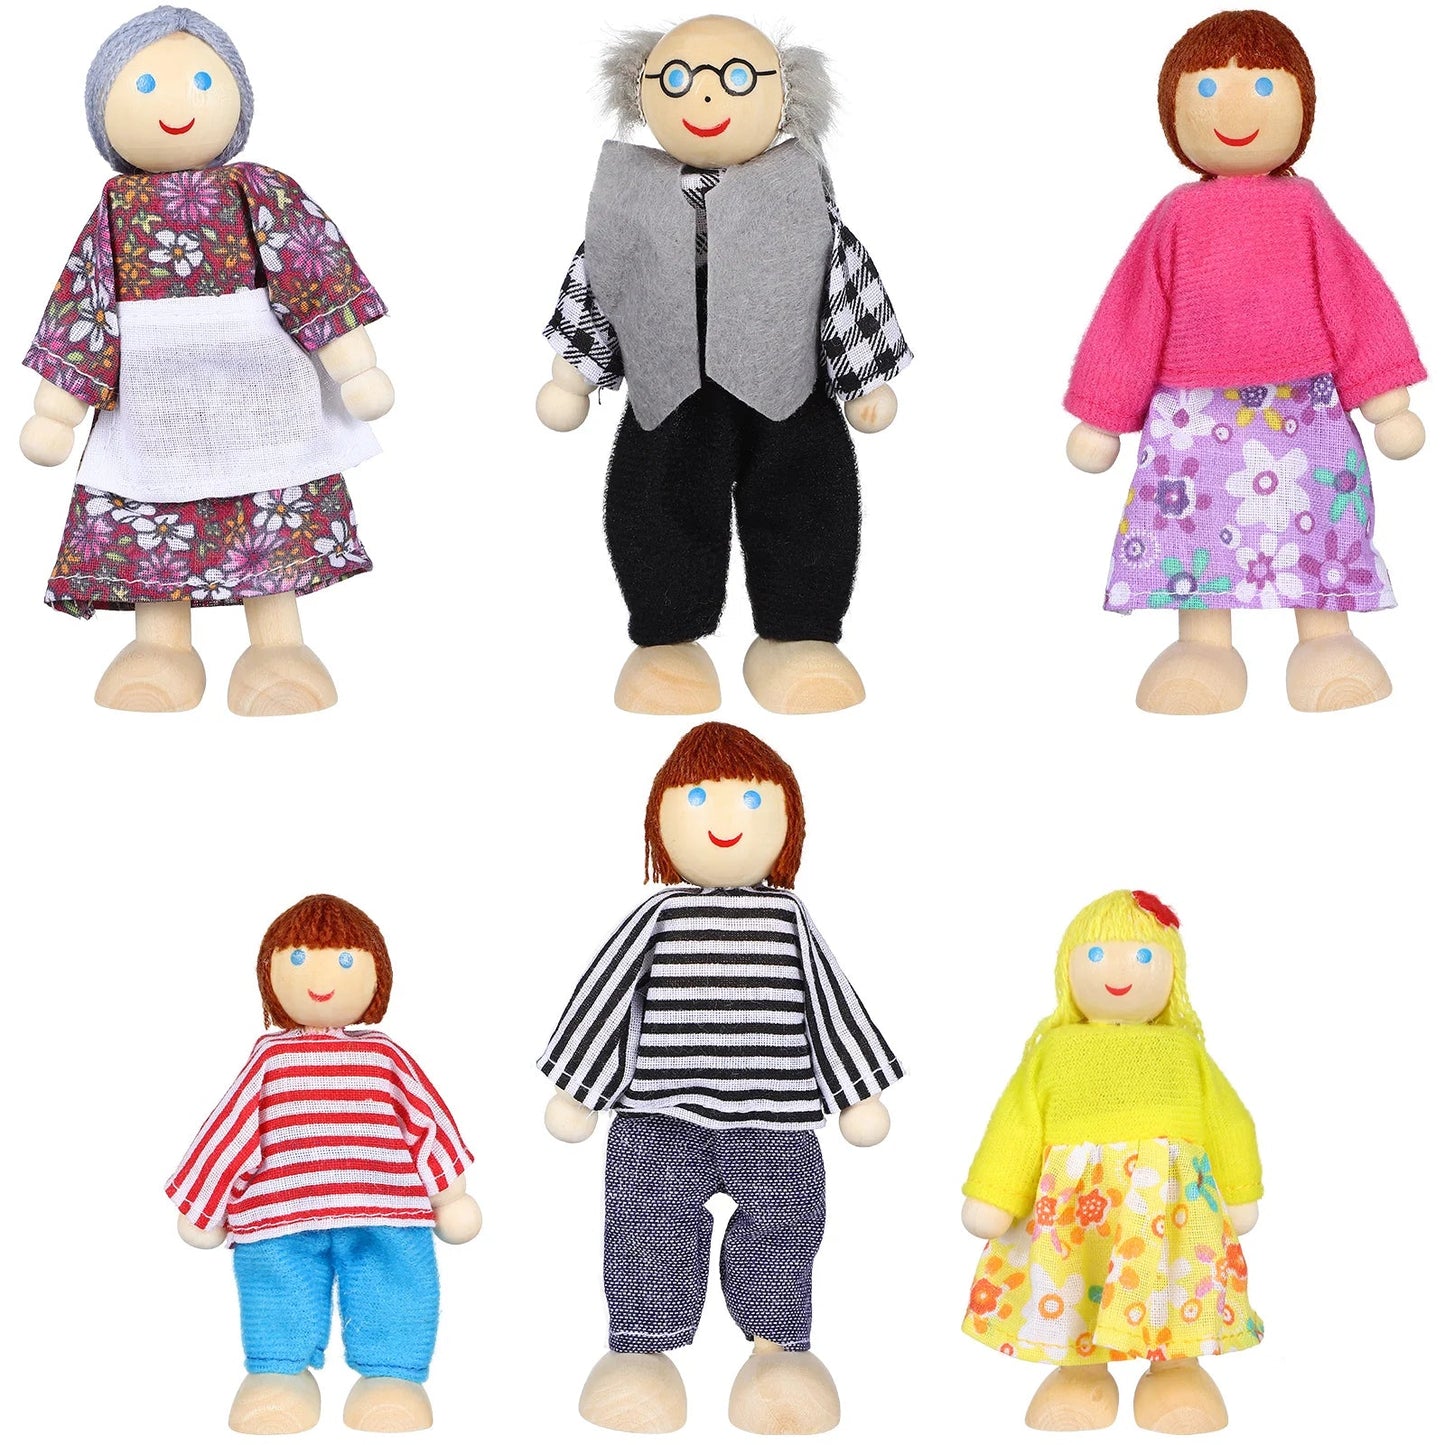 Family Member Dolls Wooden Puppet Toys for Pretend Play - Set of 6/7 Pieces - ToylandEU